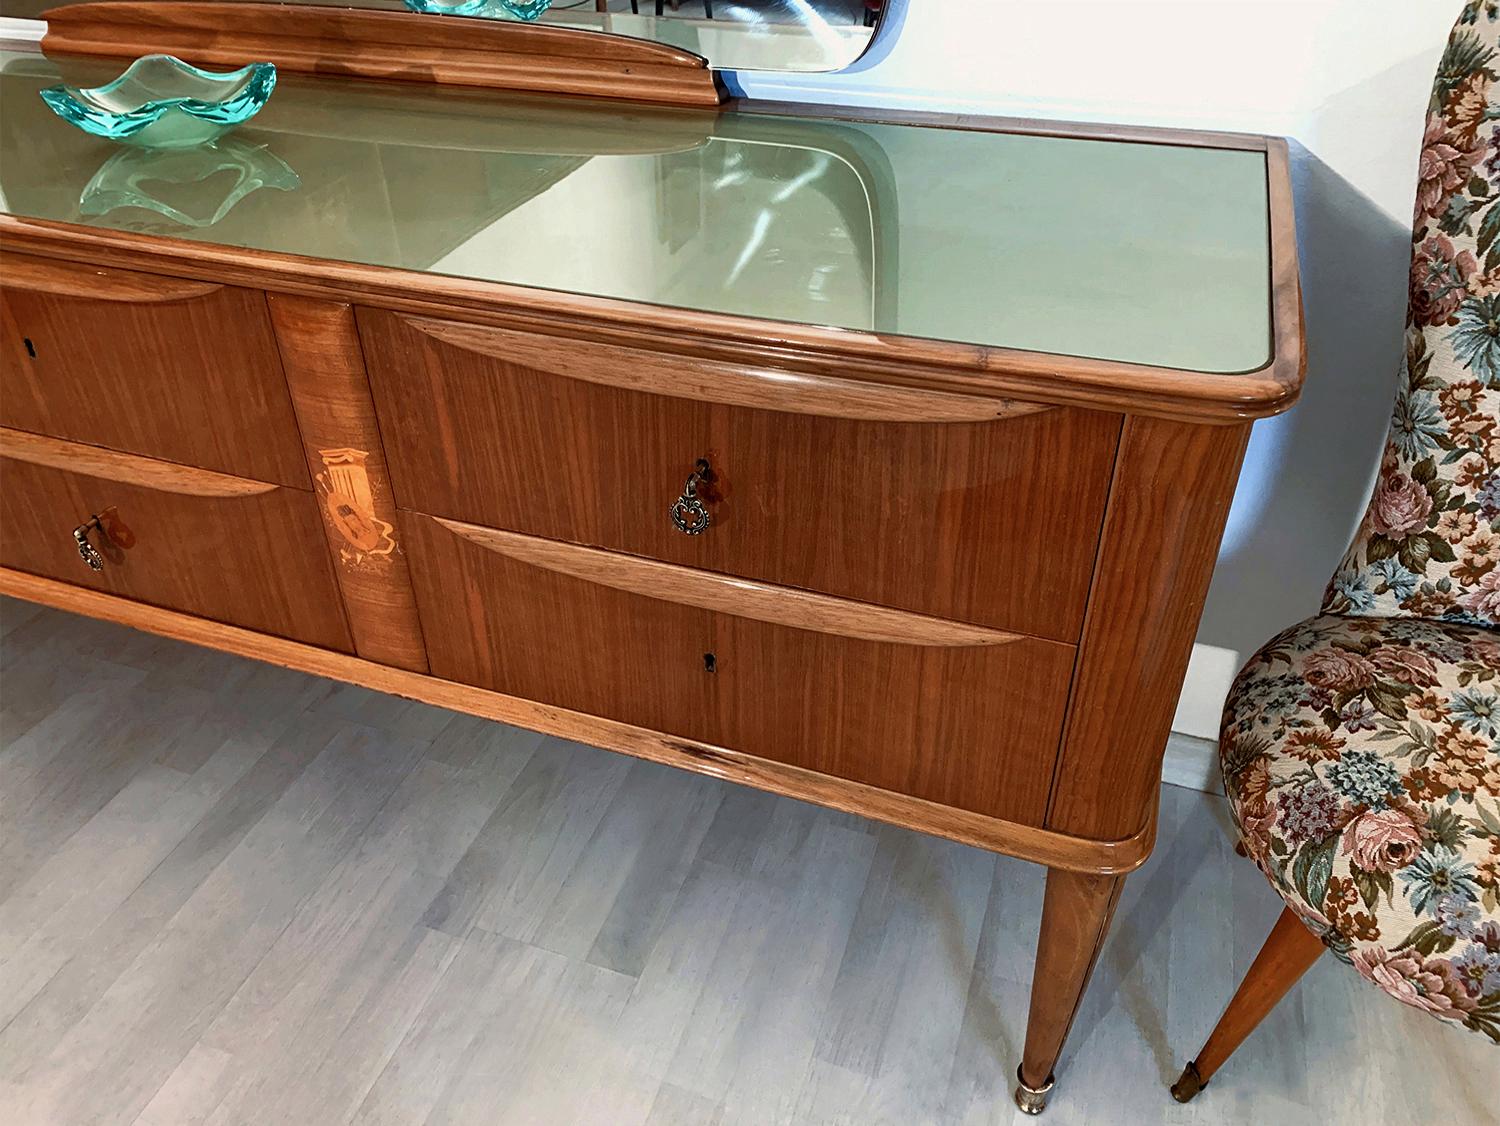 Brass Paolo Buffa Mid-Century Walnut Chest of Drawers with Inlays and Mirror, 1950s For Sale